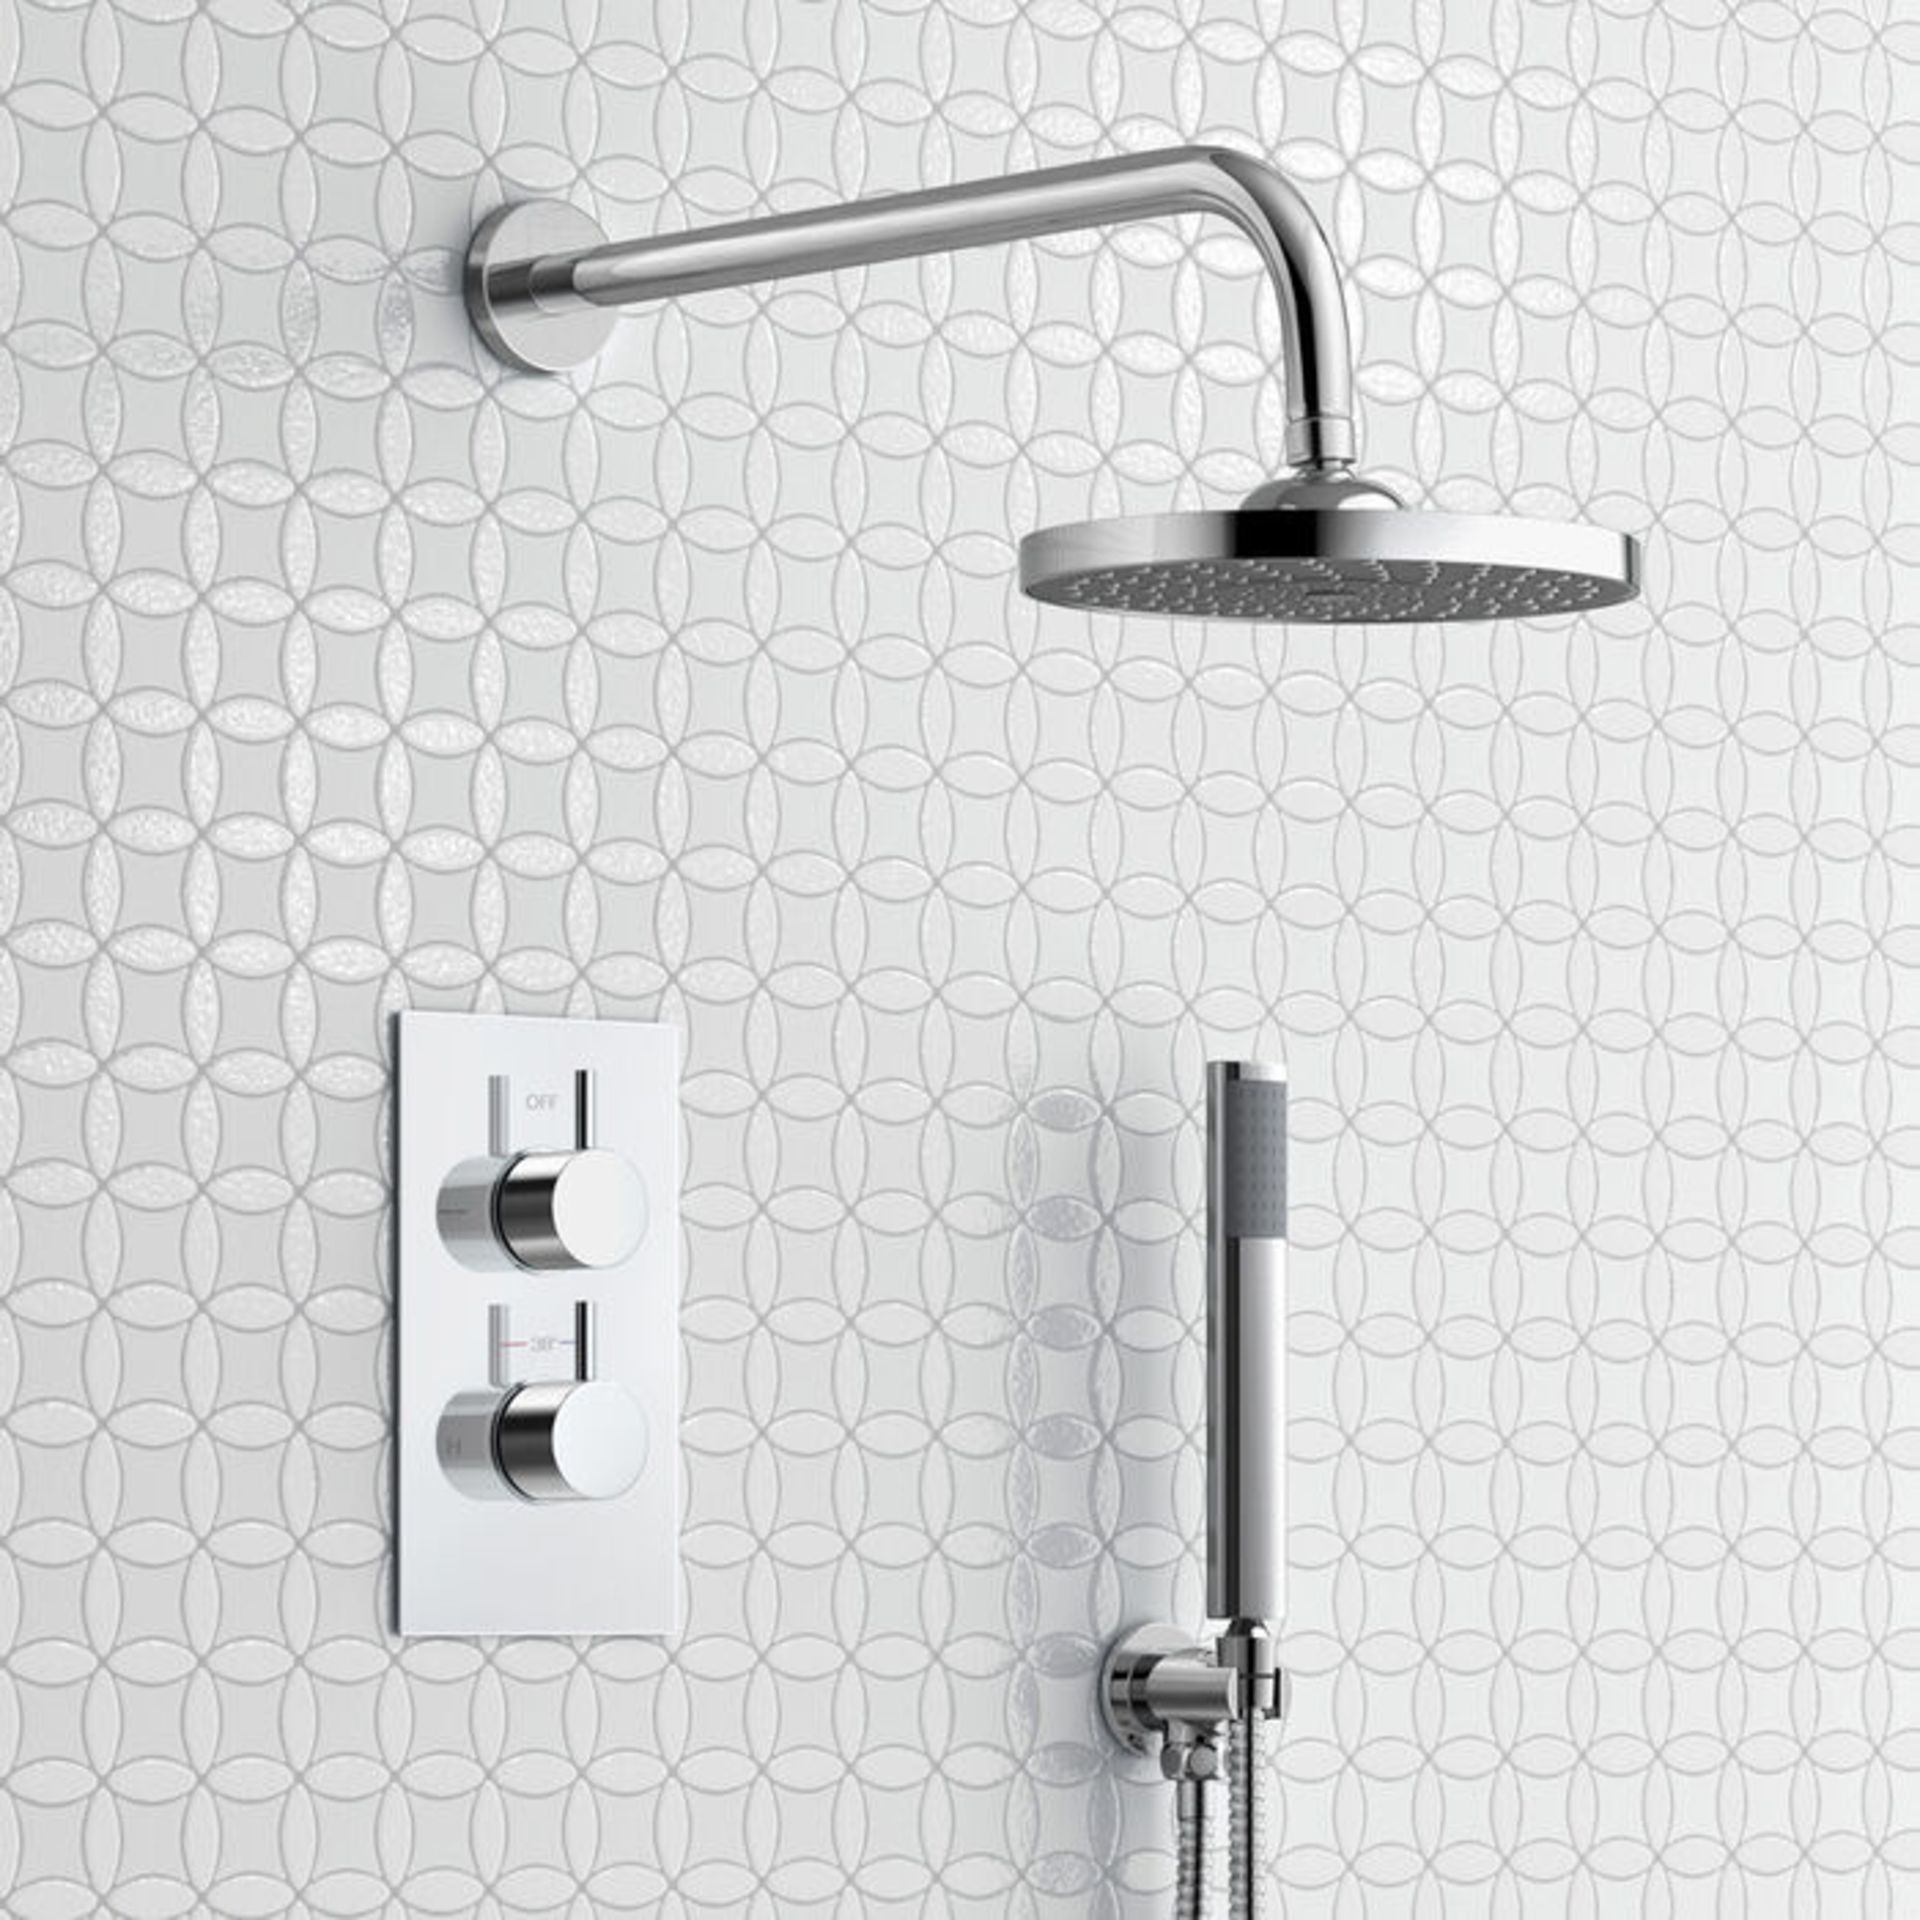 (PM37) Round Concealed Thermostatic Mixer Shower Kit & Medium Head. Family friendly detachabl... - Image 2 of 5